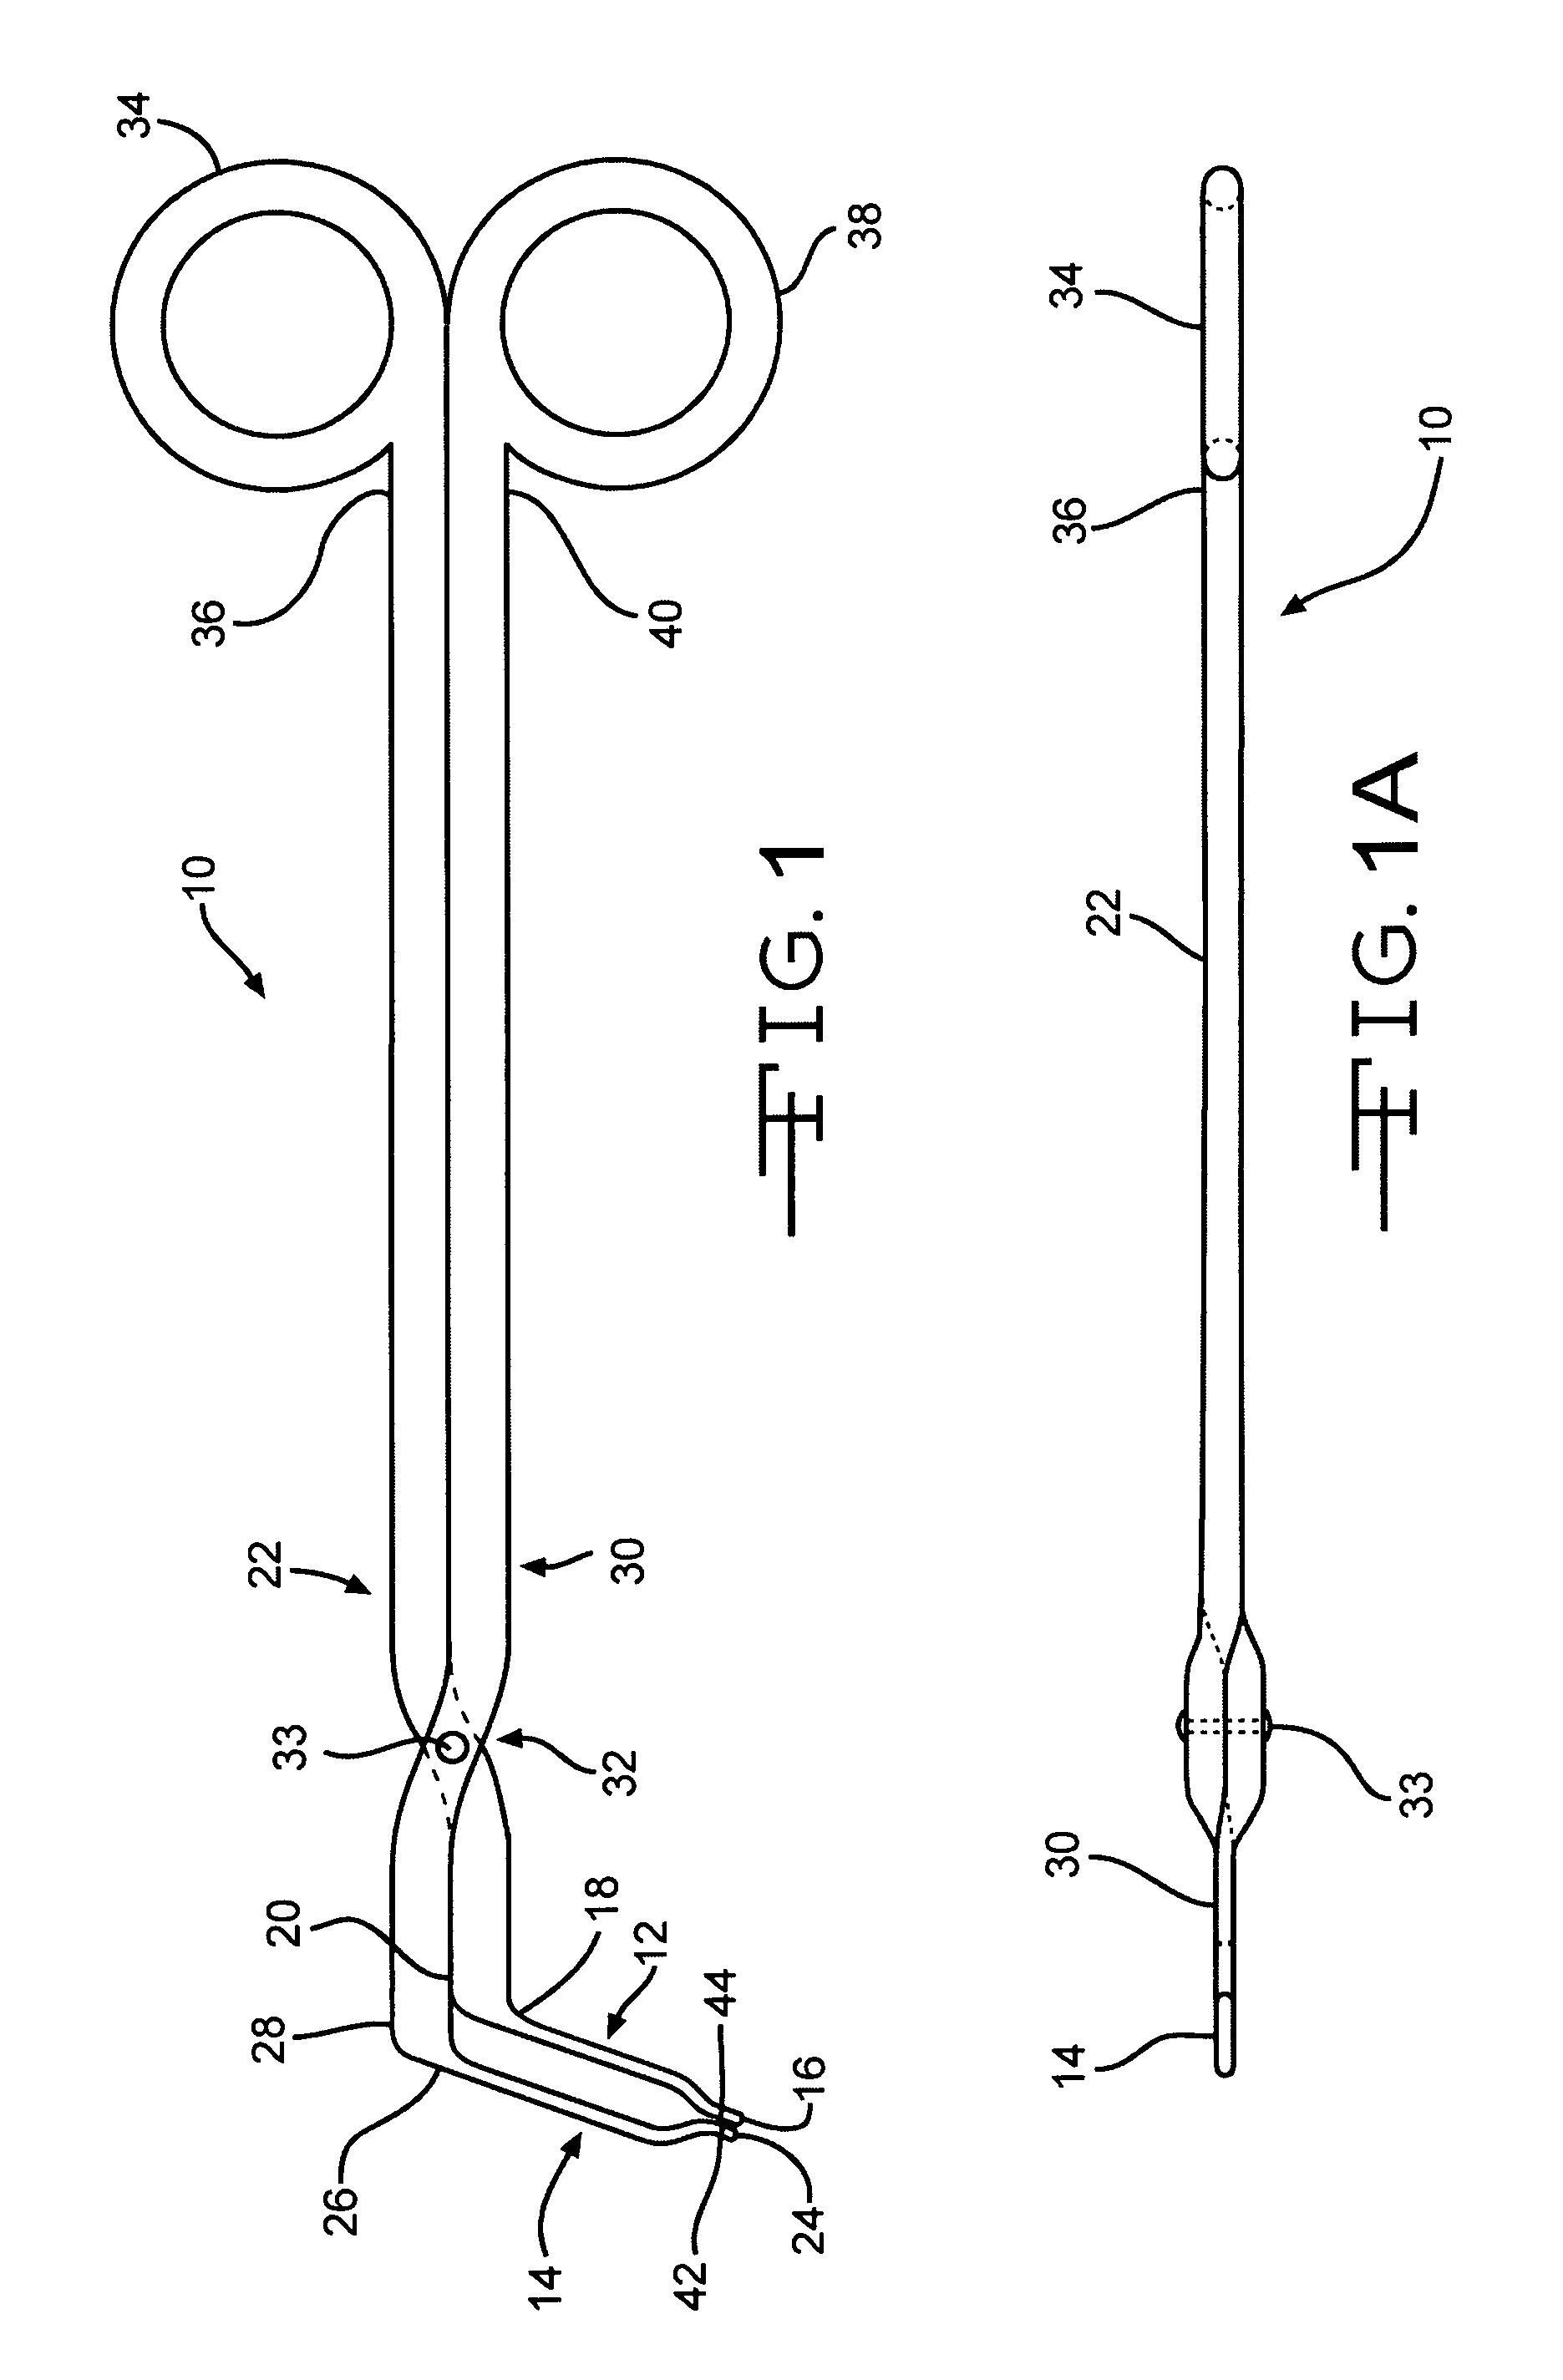 Method for in-situ simultaneous shaping of adjacent matrix bands and tools